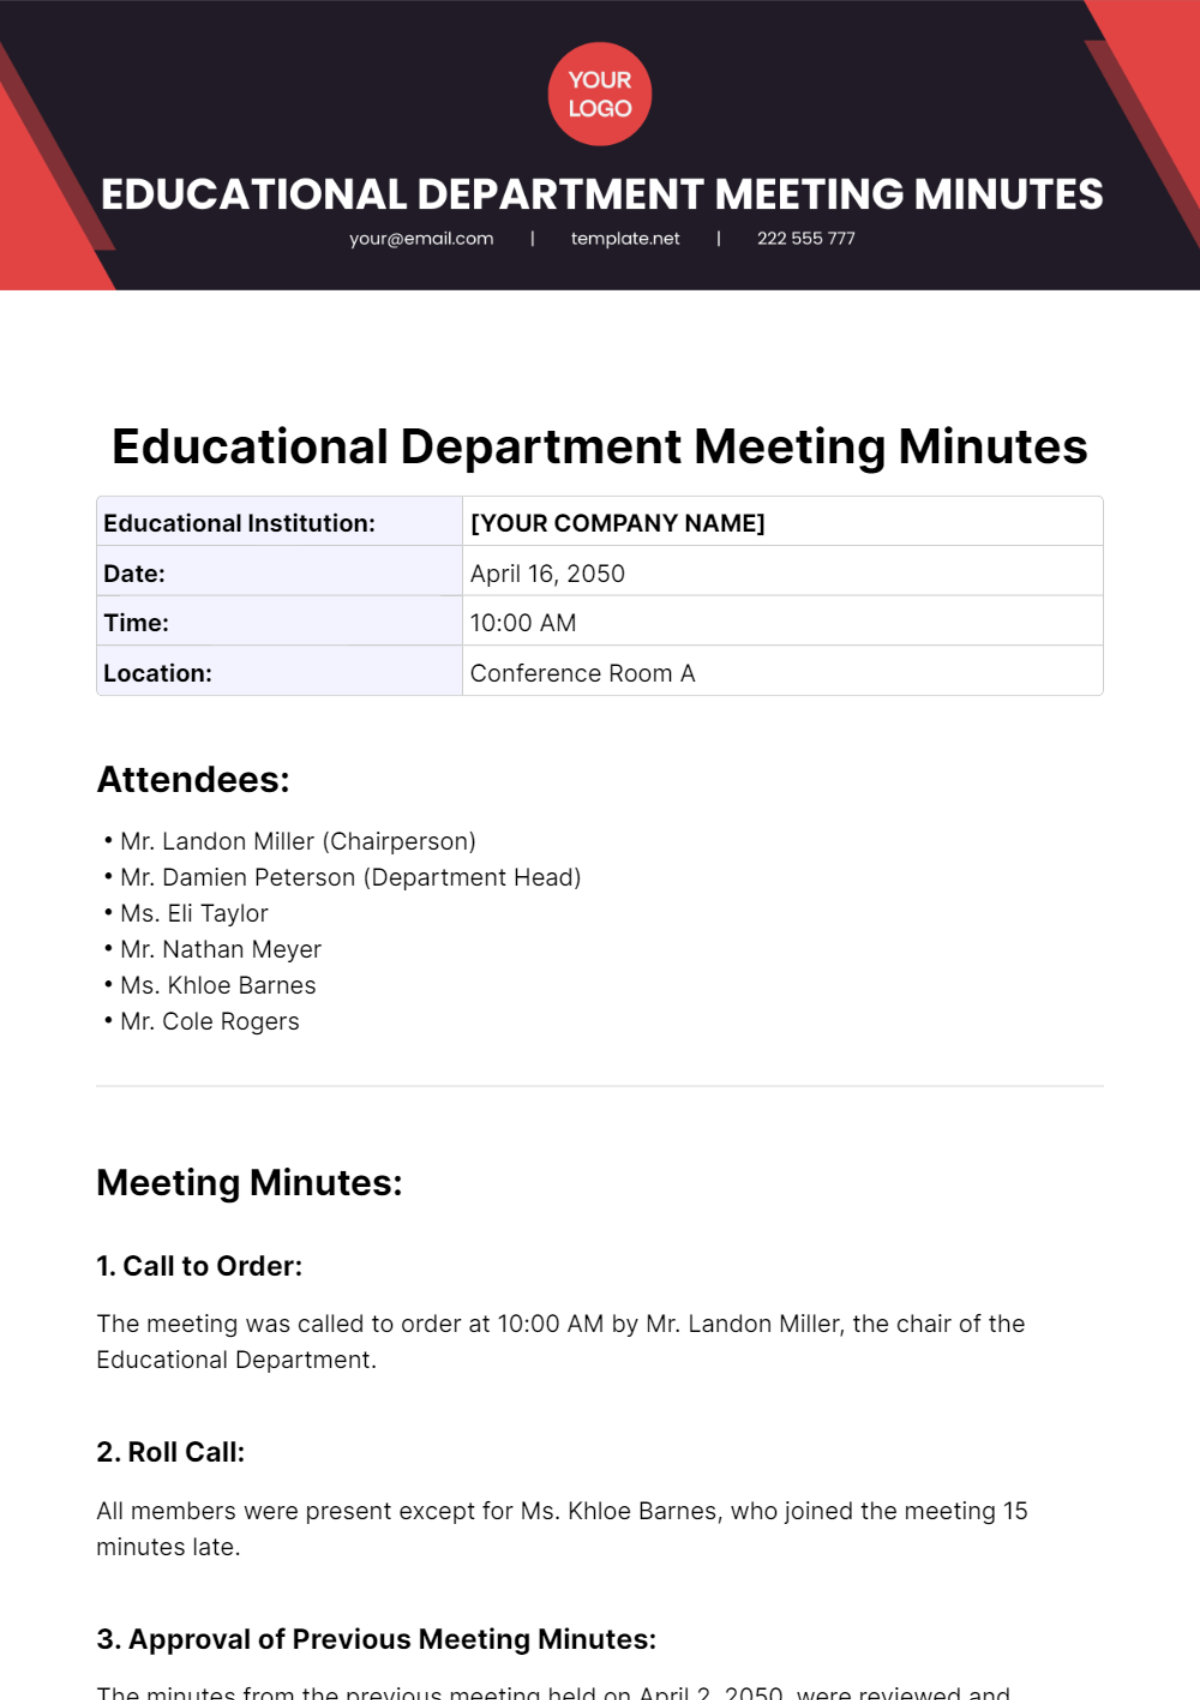 Educational Department Meeting Minutes Template